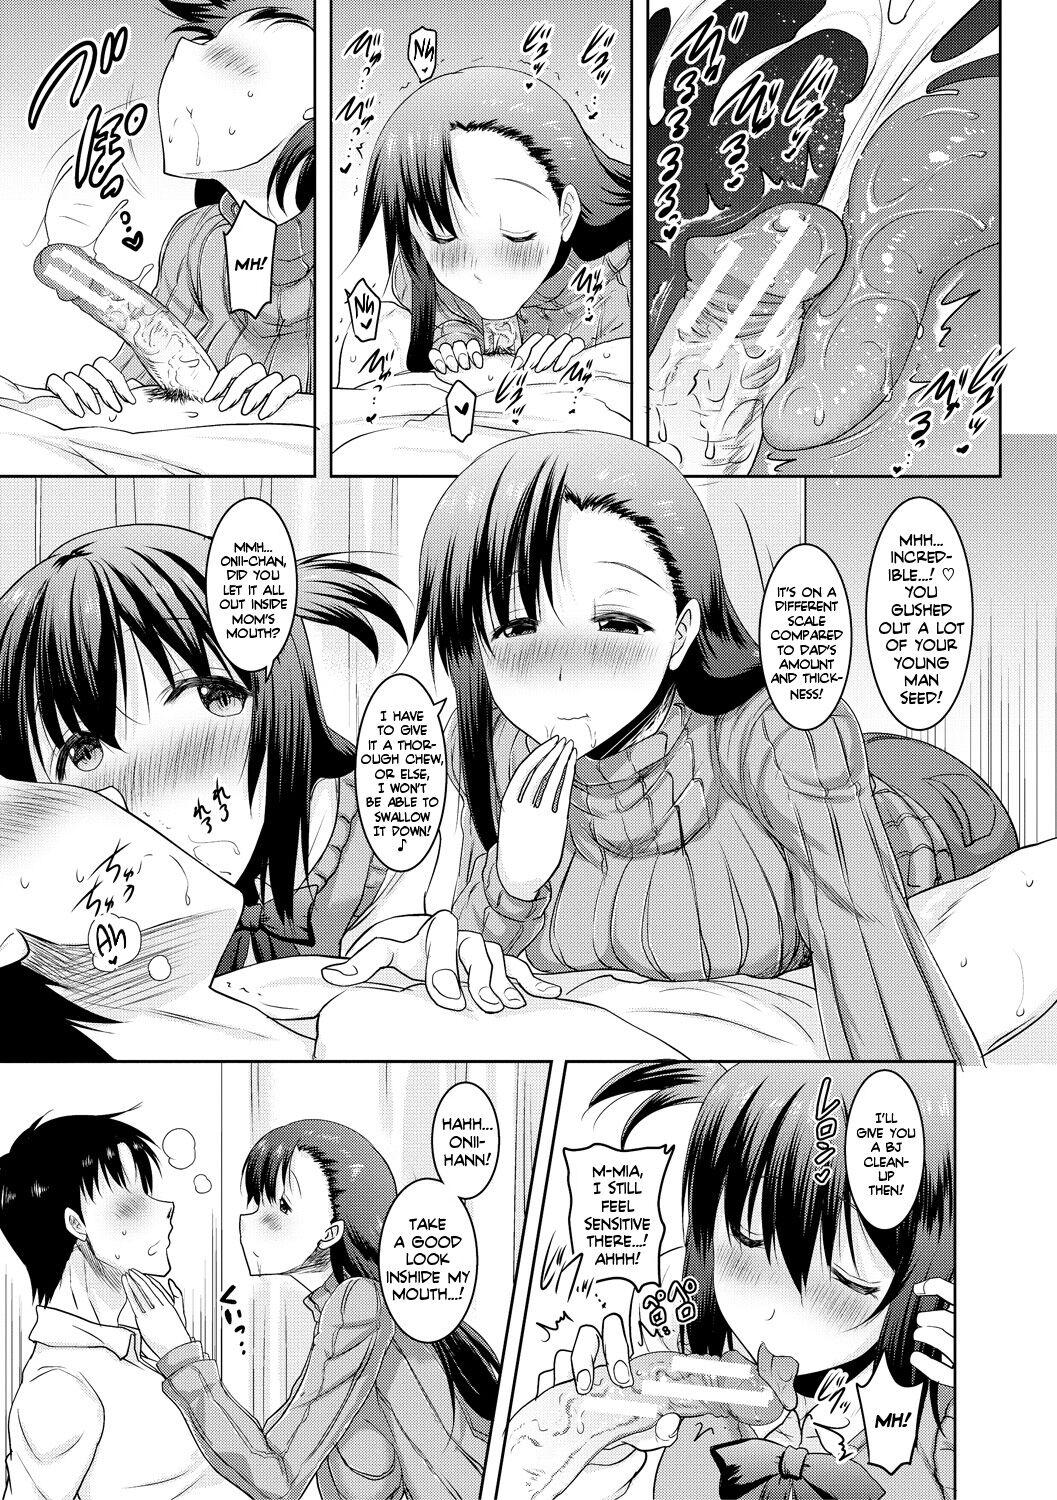 [Pony-R] I Can't Live Without My Little Sister's Tongue Chapter 01-02 + Secret Baby-making Sex with a Big-titted Mother and Daughter! (Kyonyuu Oyako no Shita to Shikyuu ni Renzoku Shasei) [English] [Team Rabu2] [Digital] 51